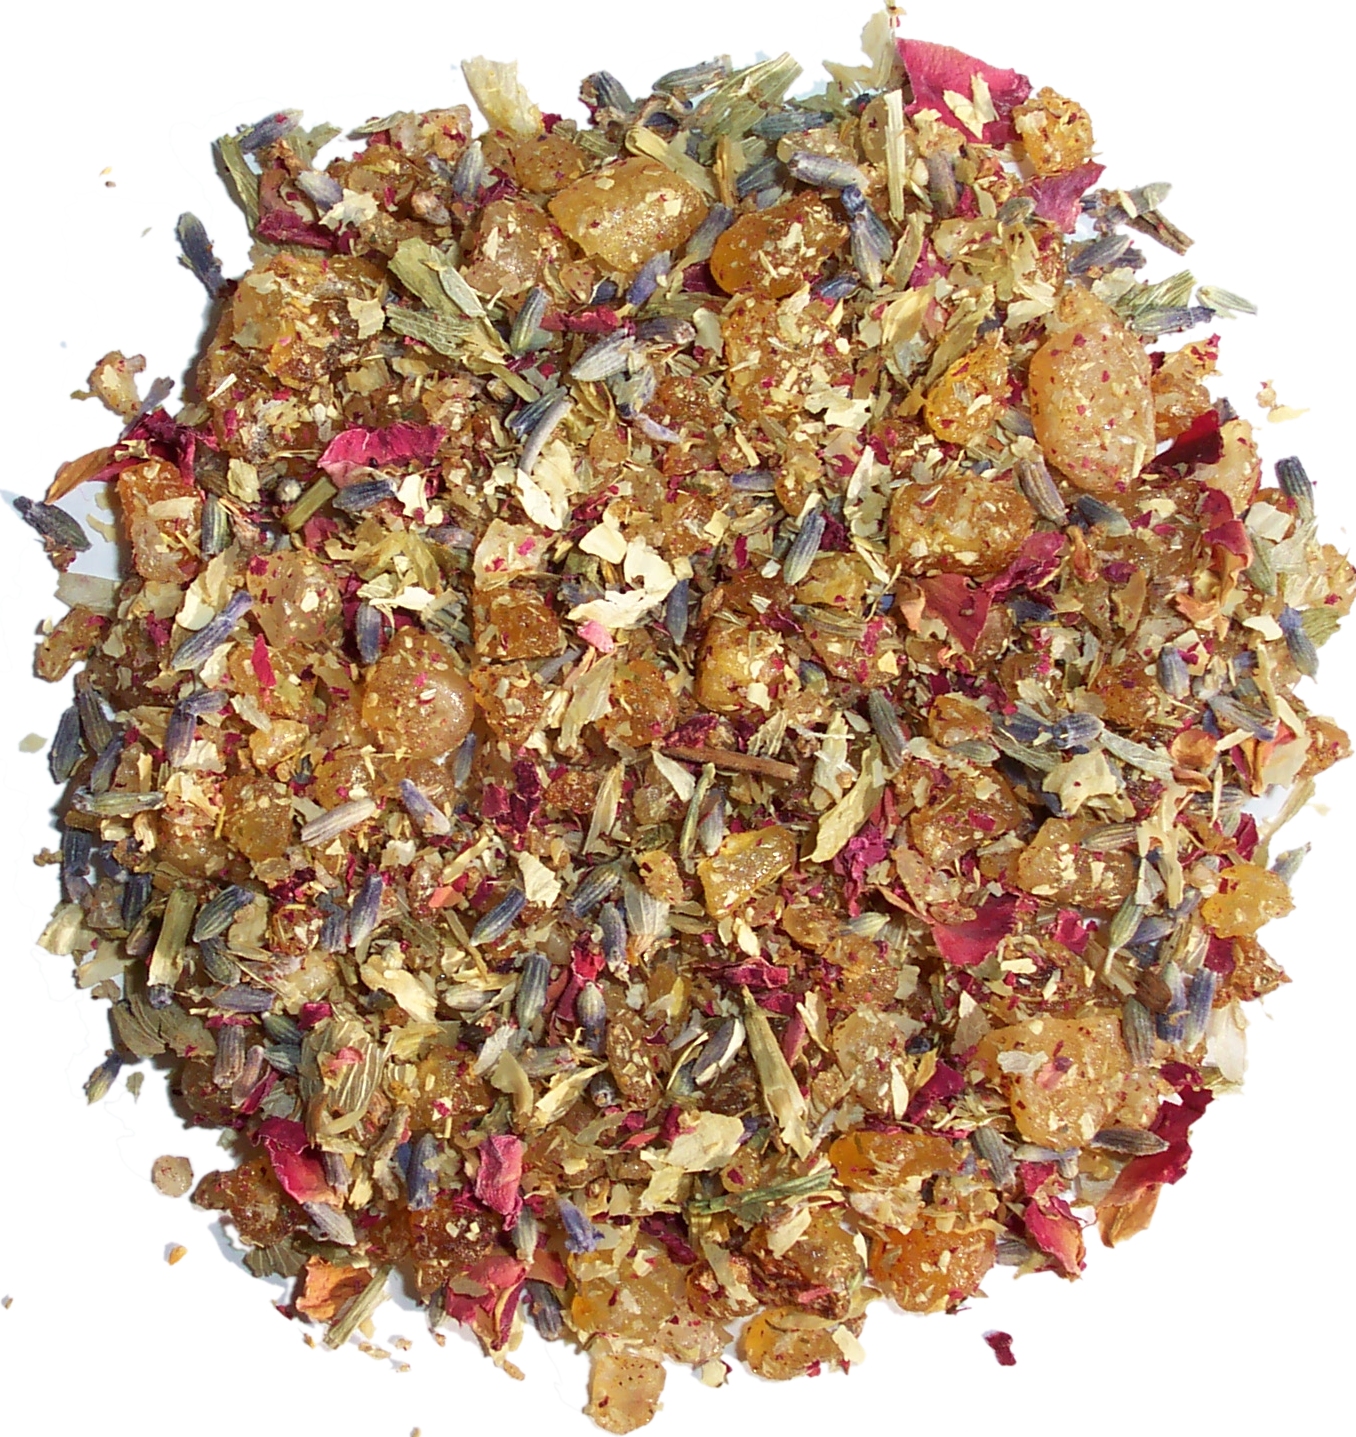 500g PEACE Hand Blended Incense